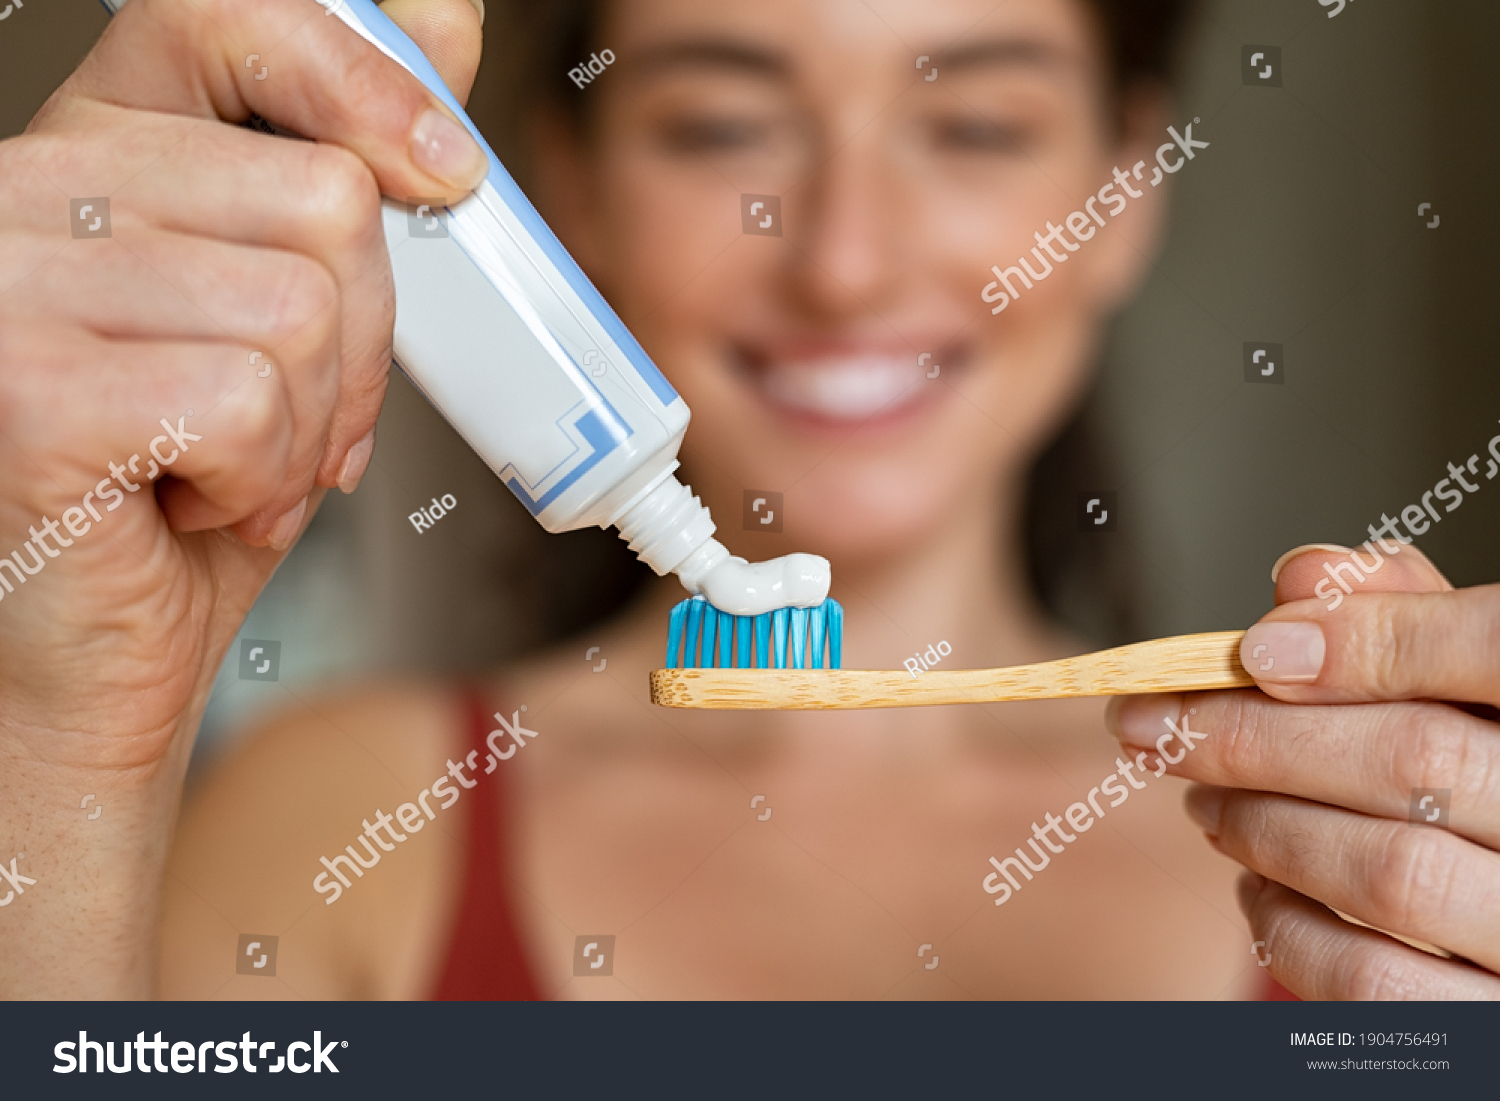 Close up of woman with tooth brush applying paste in bathroom. Closeup of girl hands squeezing toothpaste on ecological wooden brush. Smiling woman applying toothpaste on eco friendly toothbrush. #1904756491